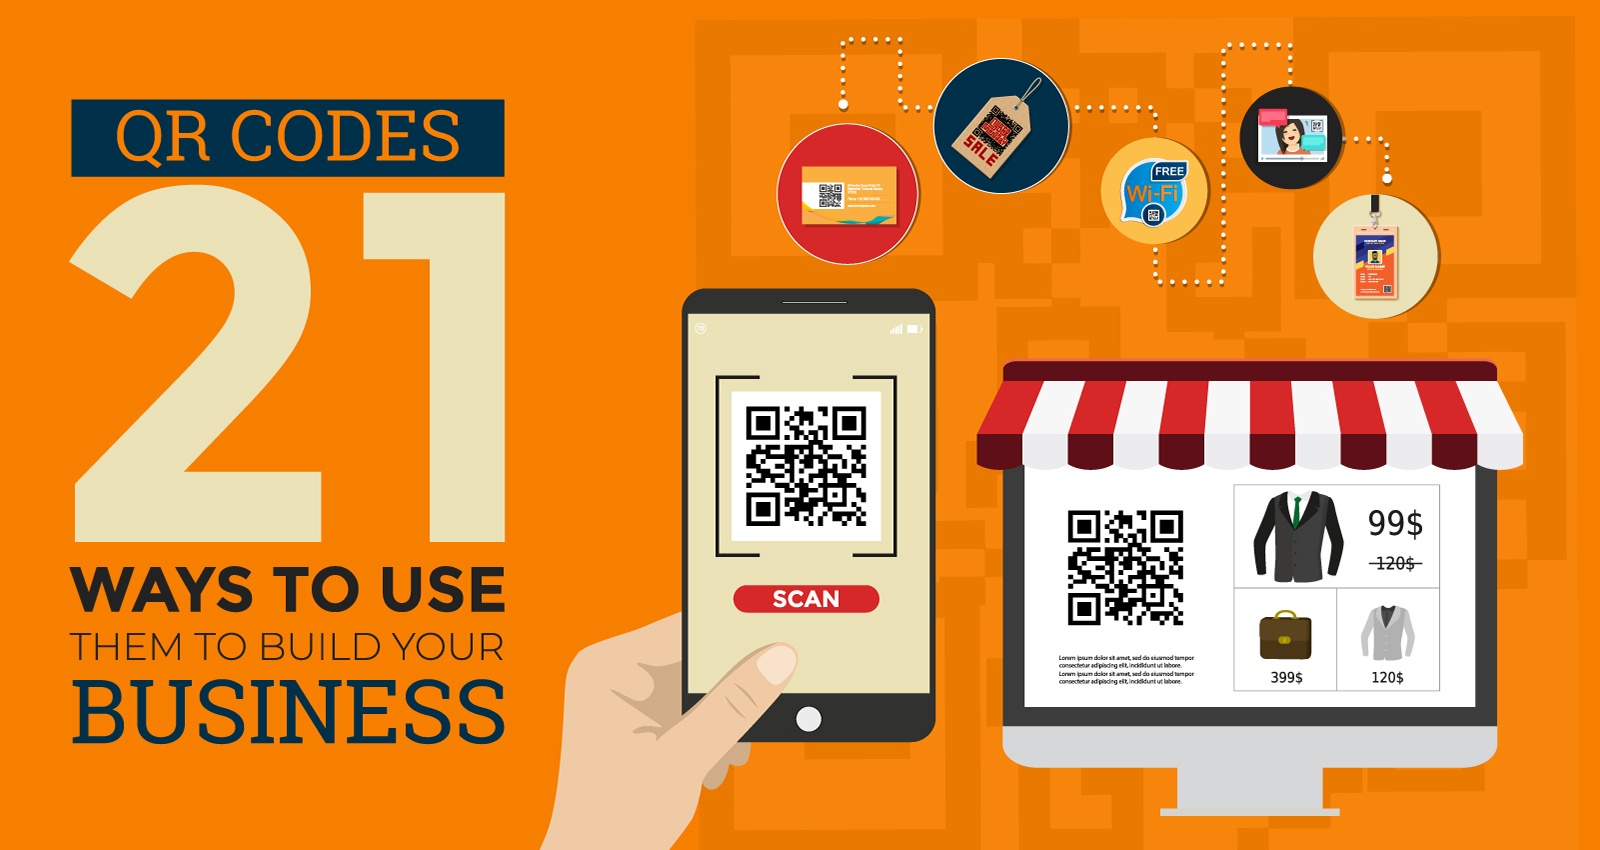 280218 QR CODES – 21 WAYS TO USE THEM TO BUILD YOUR BUSINESS Opt2 090418